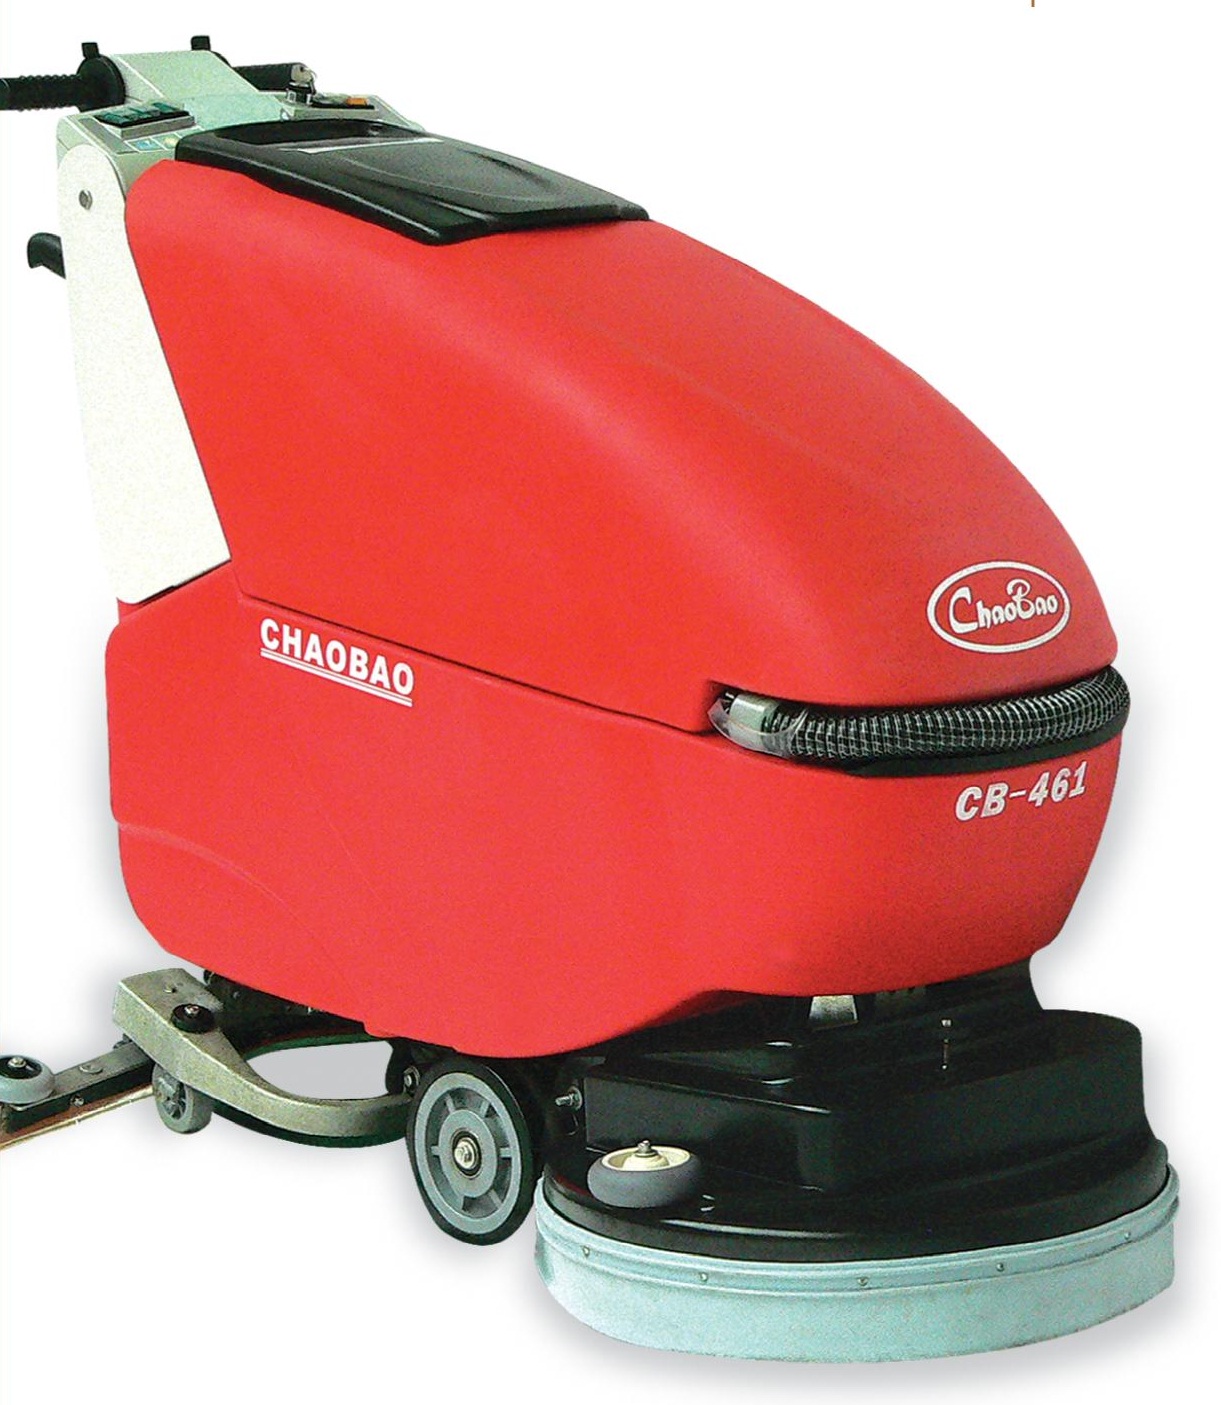 Auto sweeper with battery